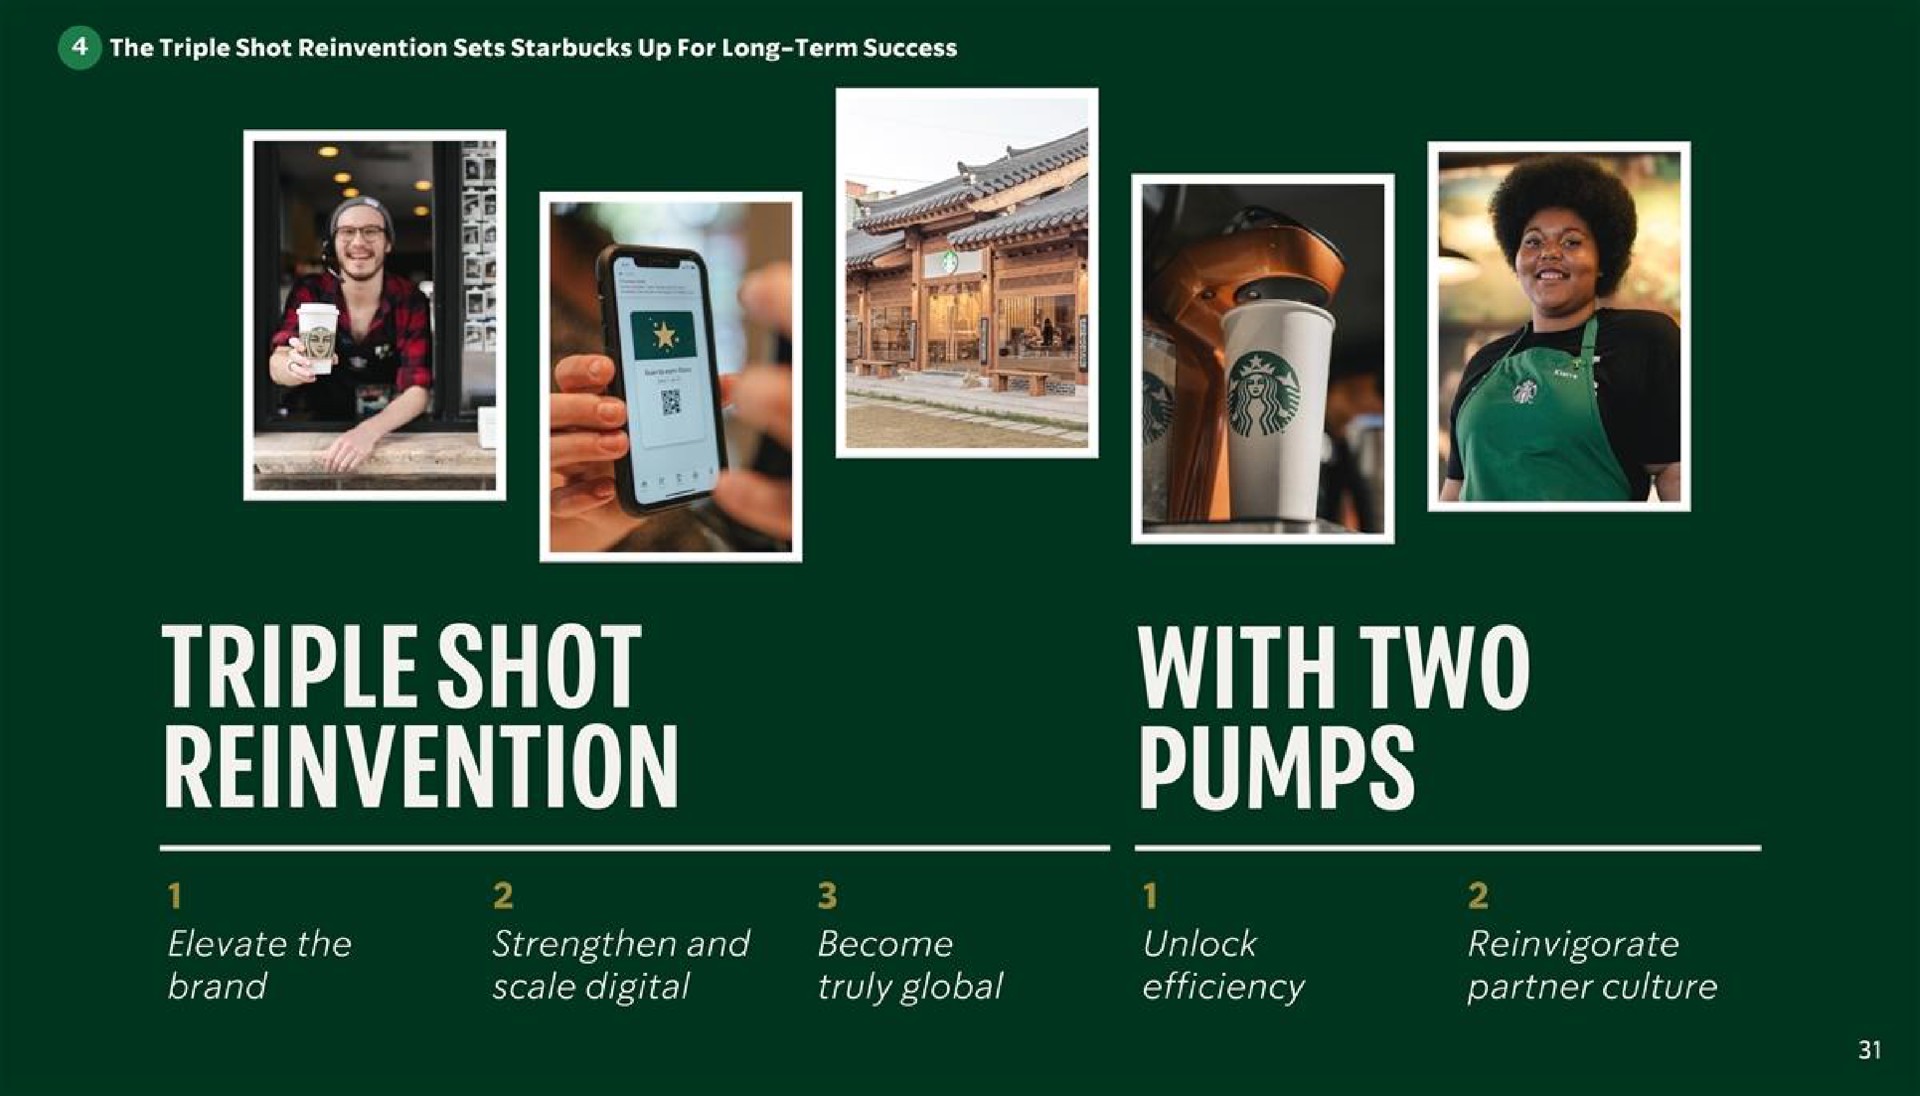 triple shot reinvention us levee are scale digital become truly global unlock efficiency reinvigorate partner culture | Starbucks